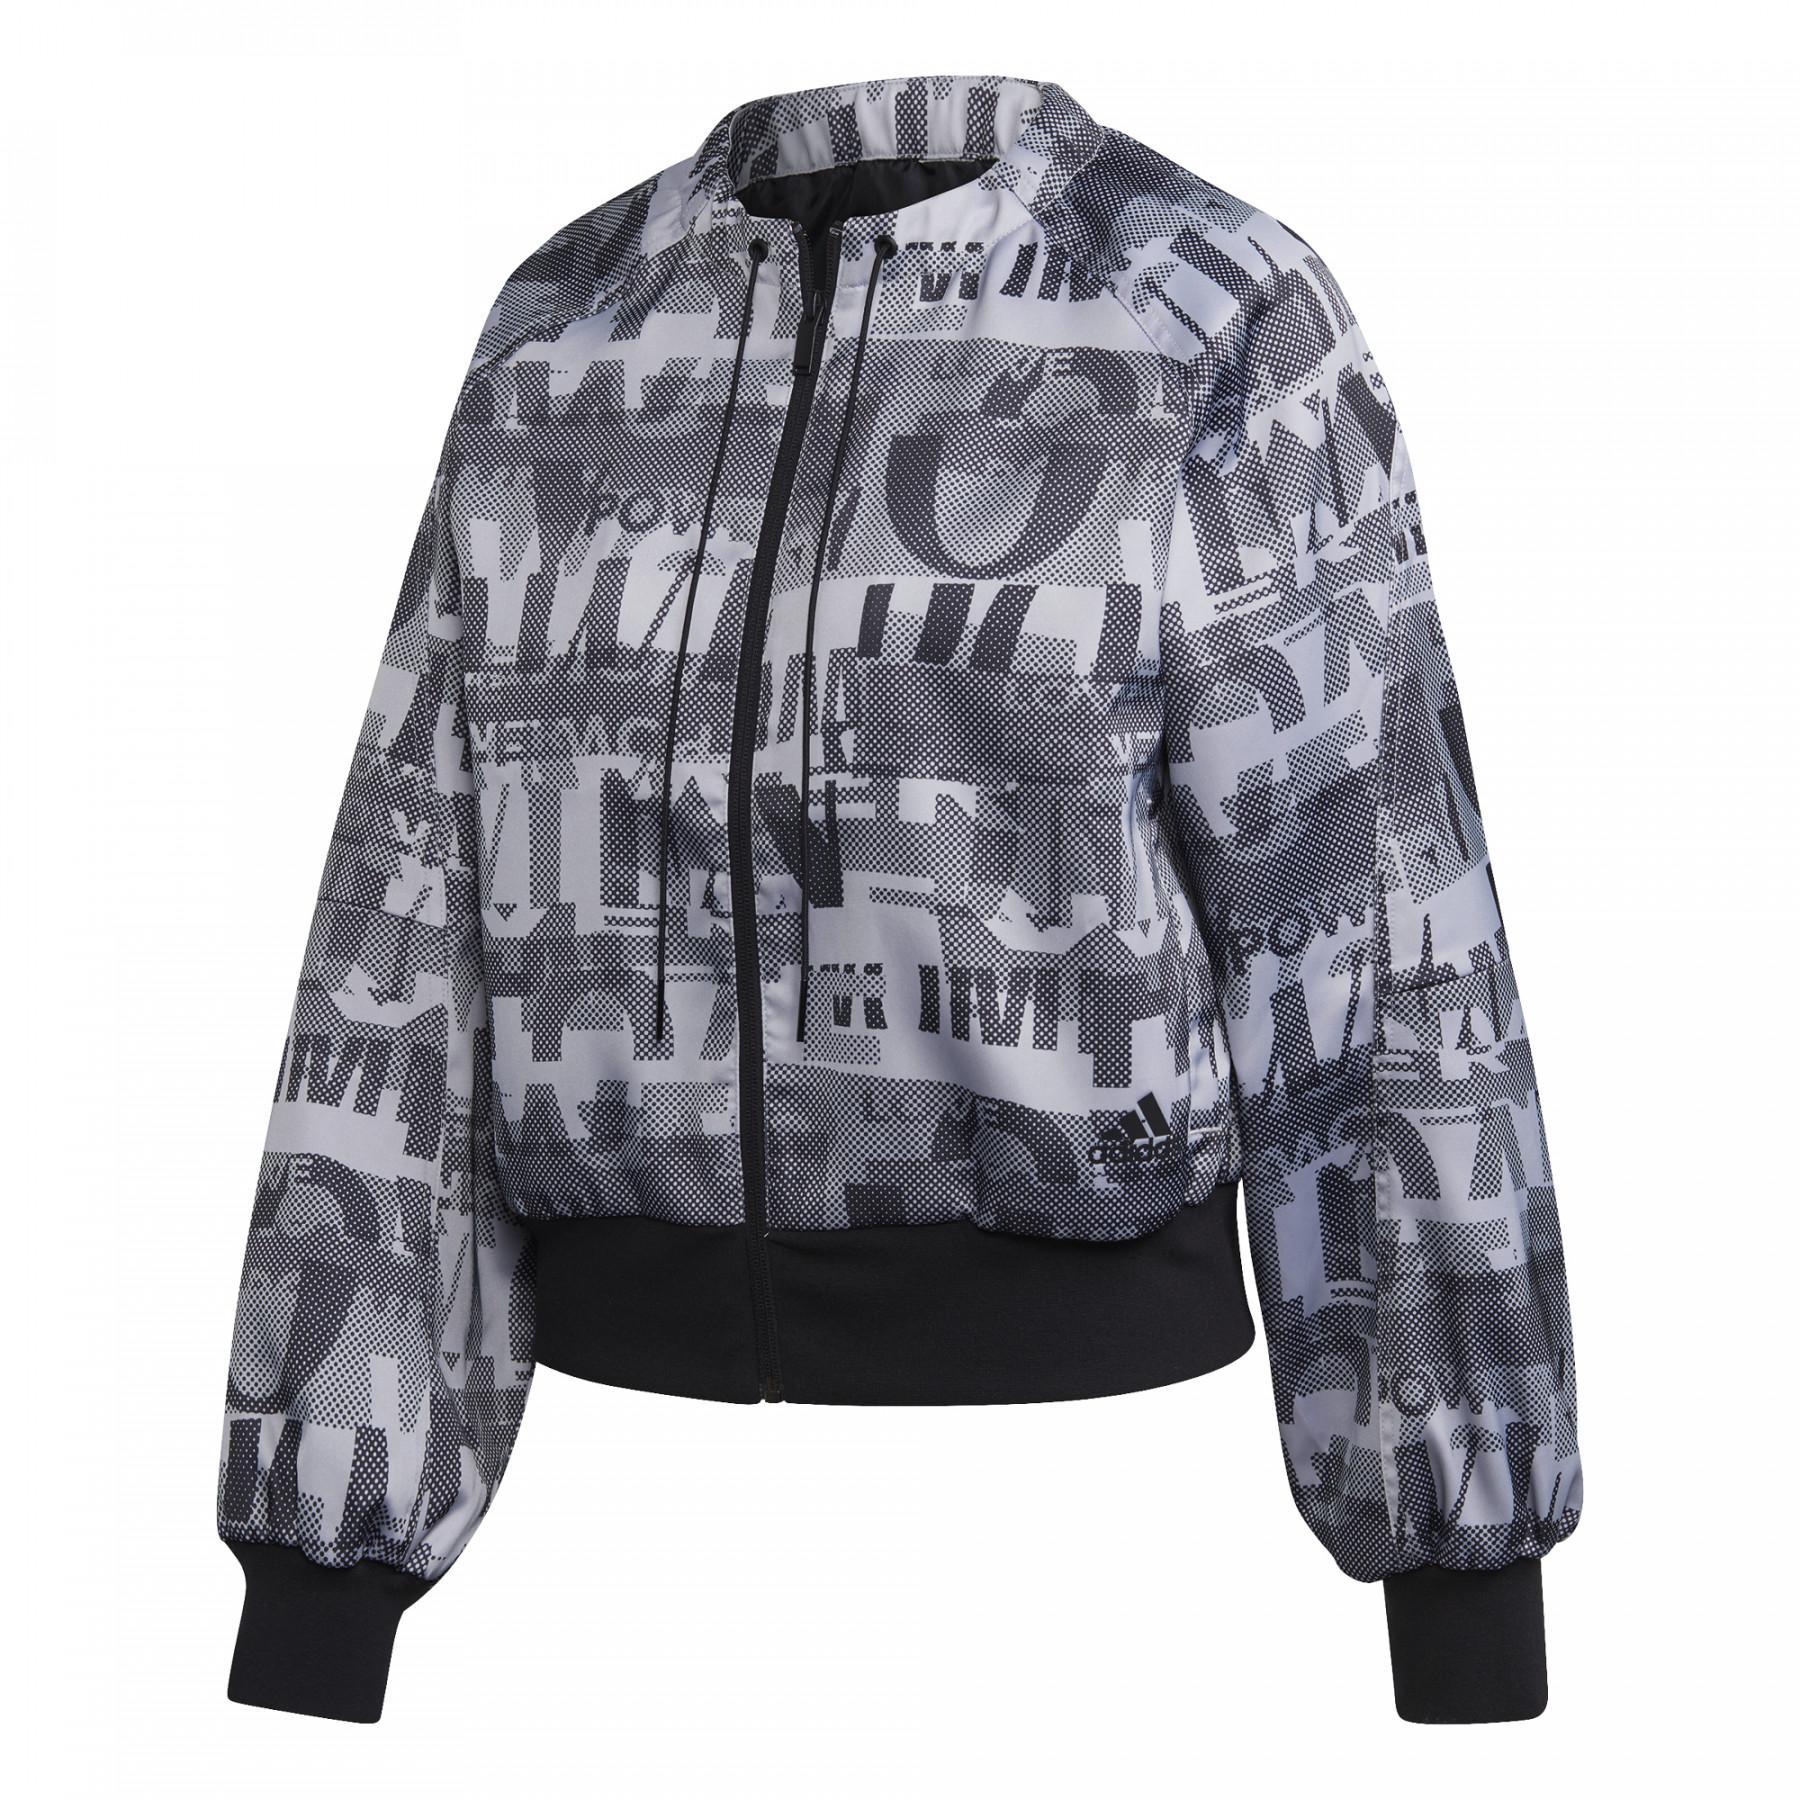 Women's jacket adidas Iteration Cover Up